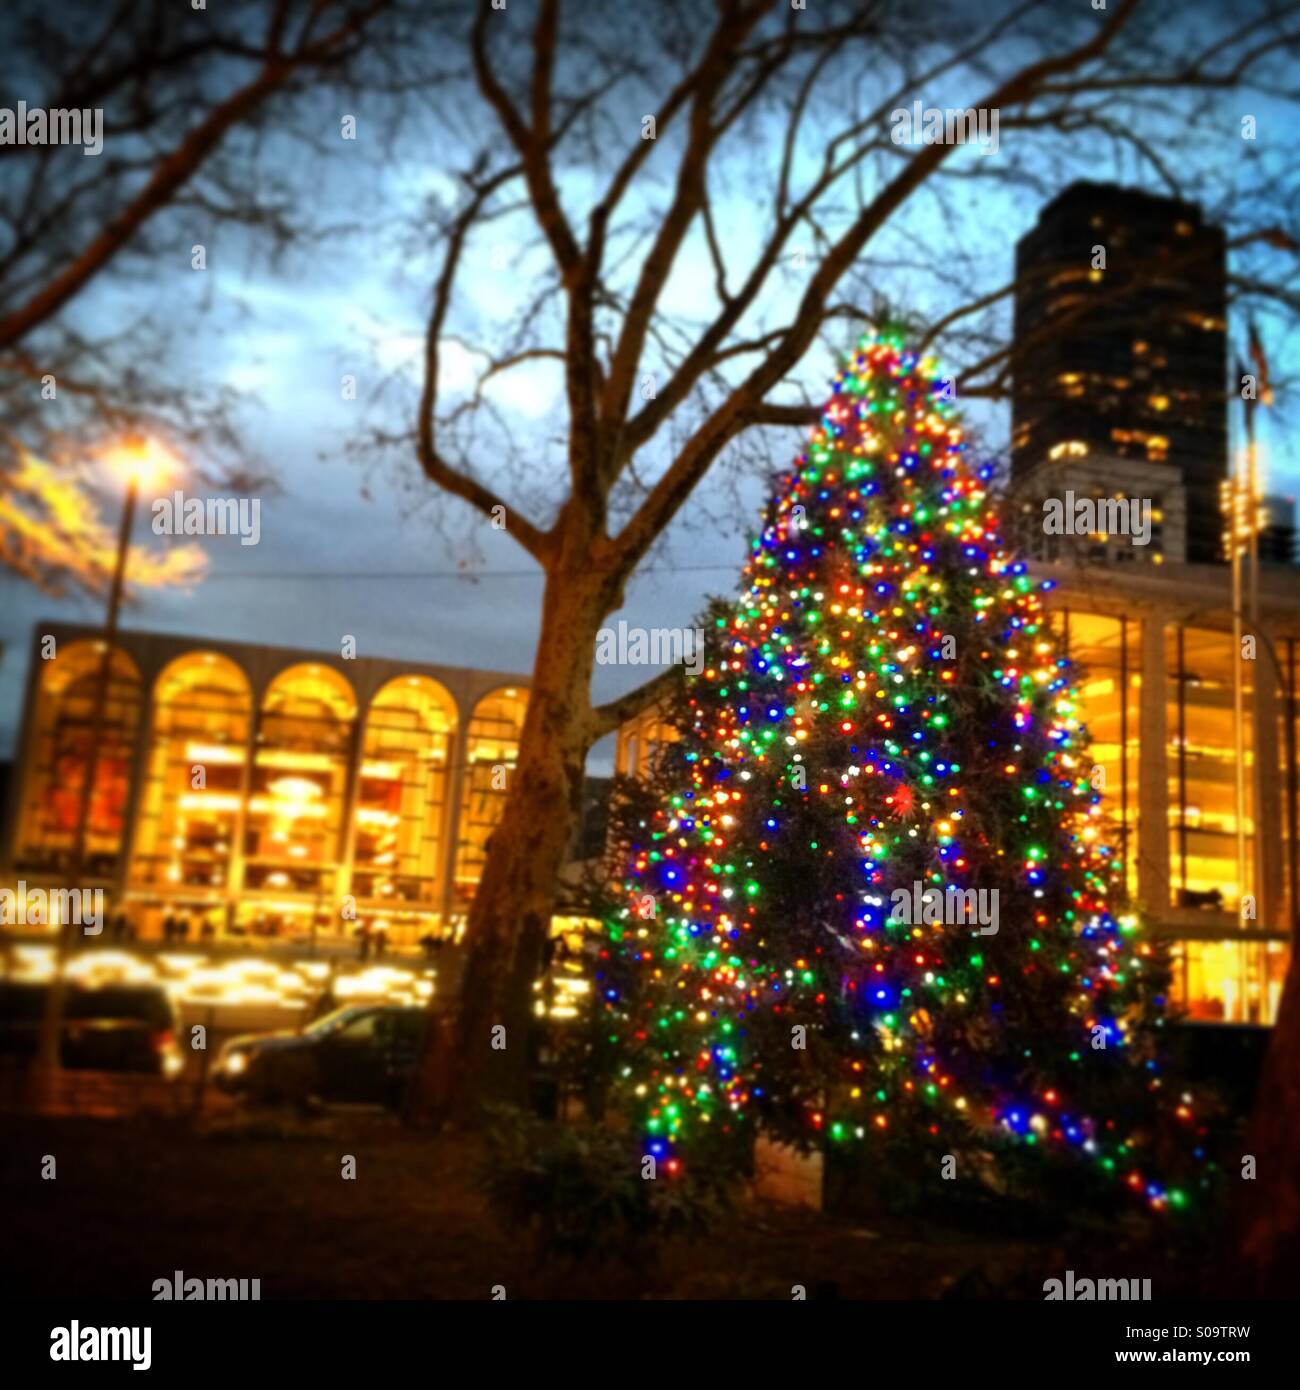 Natale a New York Foto Stock